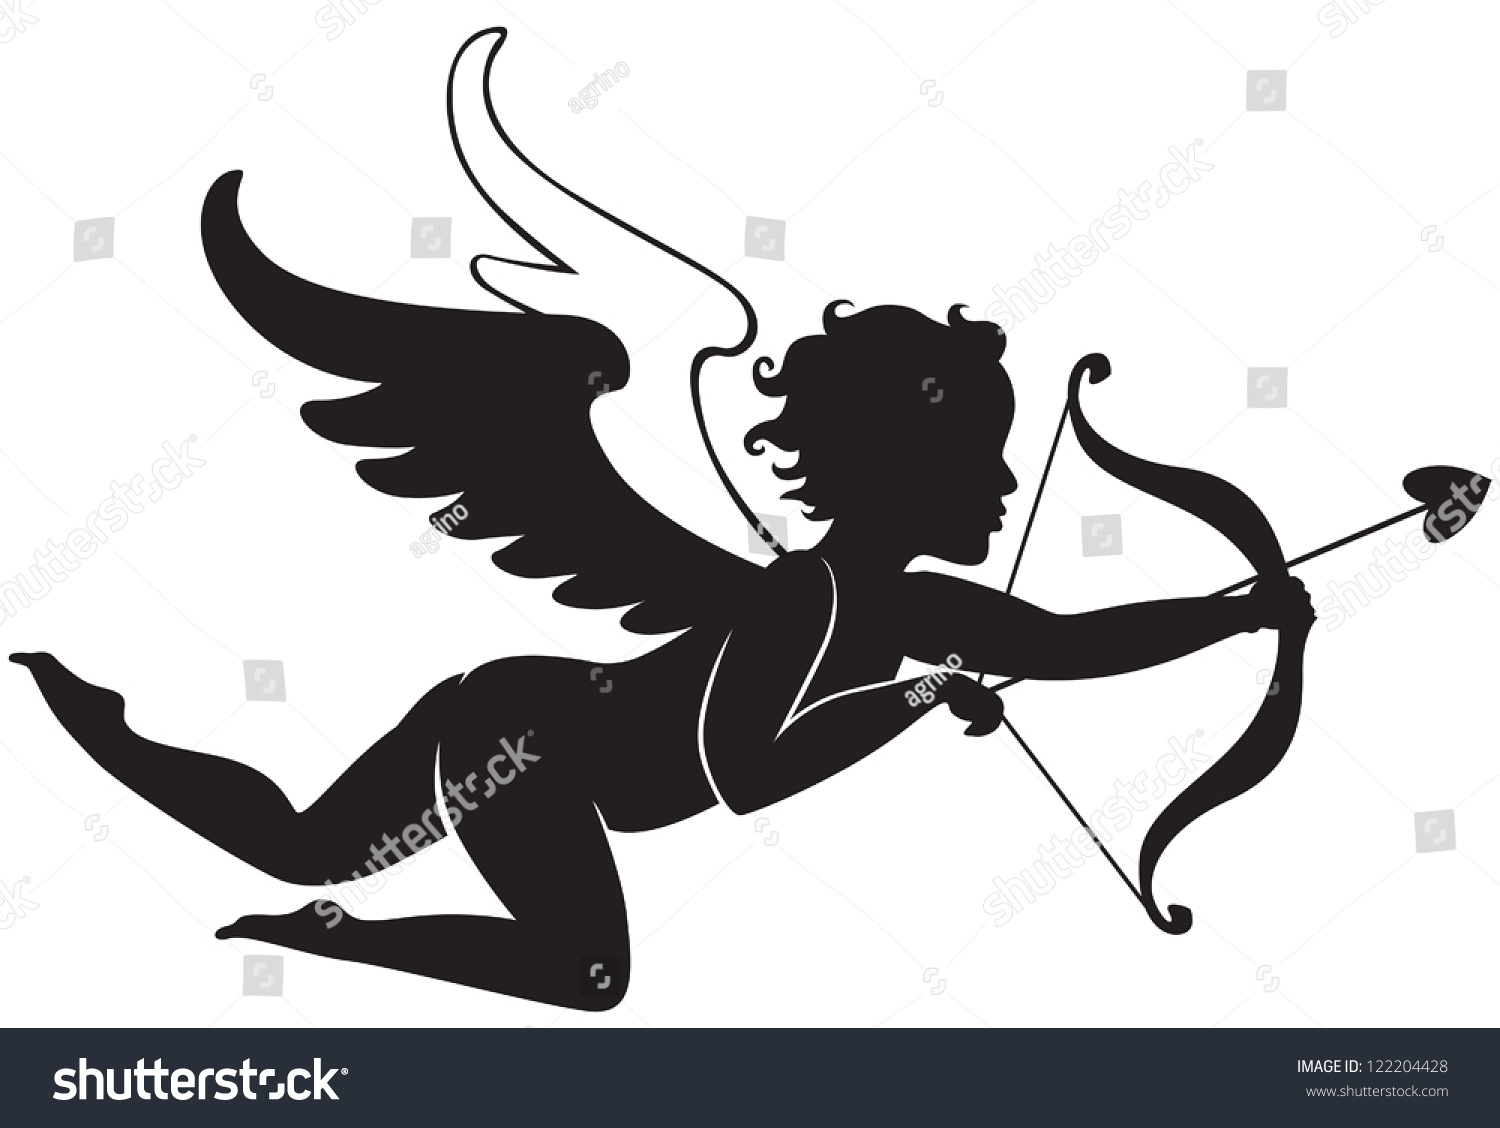 Silhouette Cupid Wings Bow Arrow Stock Vector Royalty Free 122204428 Shutterstock 4598